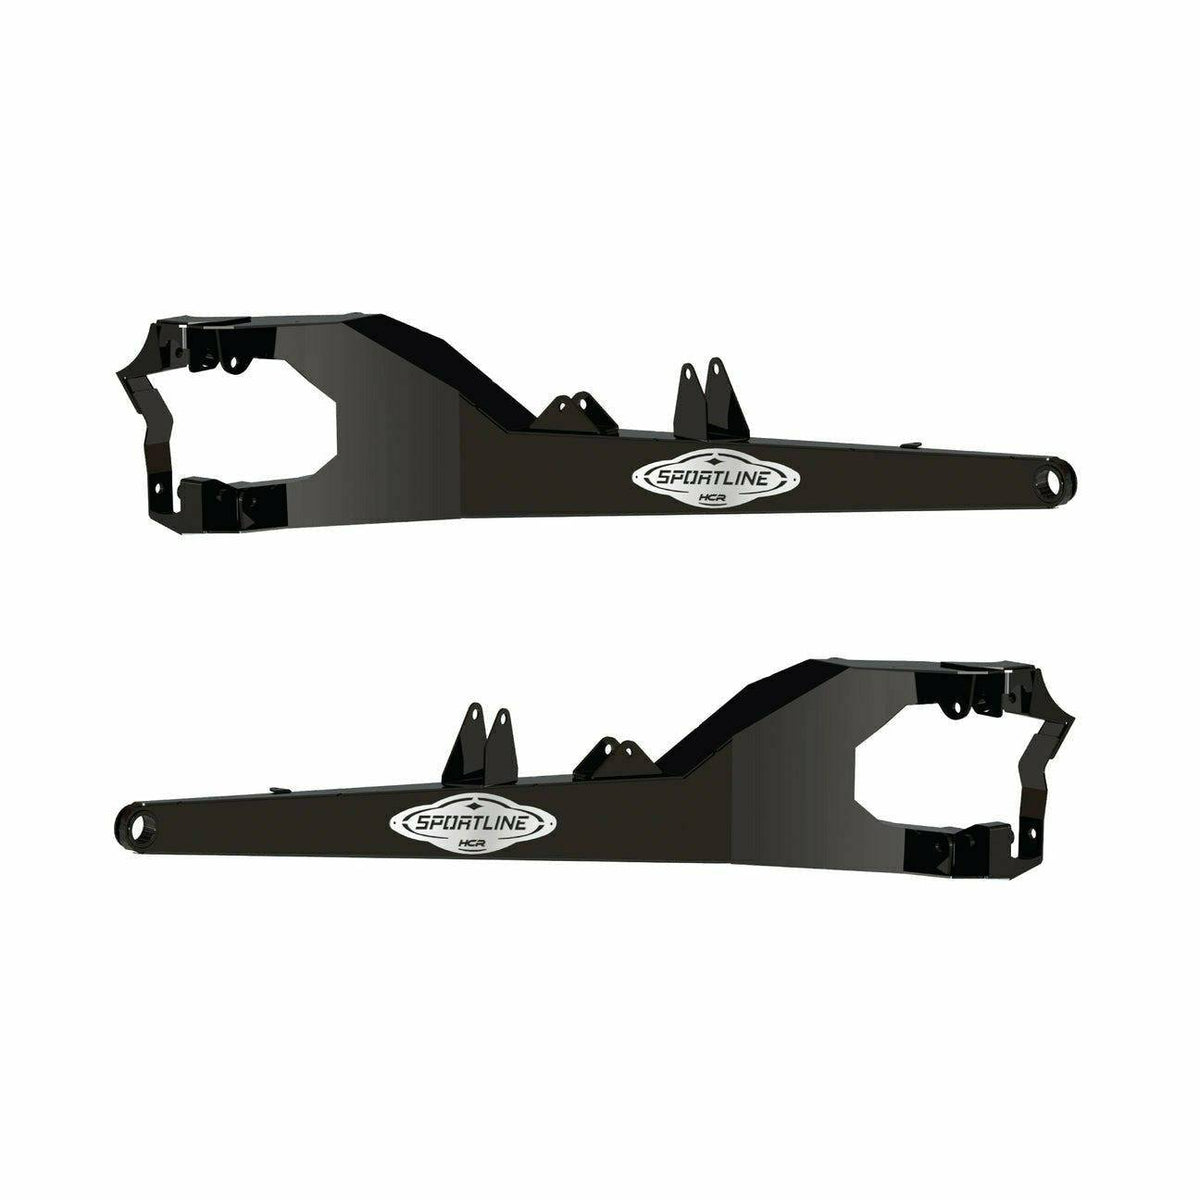 HCR Can Am Maverick X3 XRS Sport Line OEM Replacement Trailing Arms